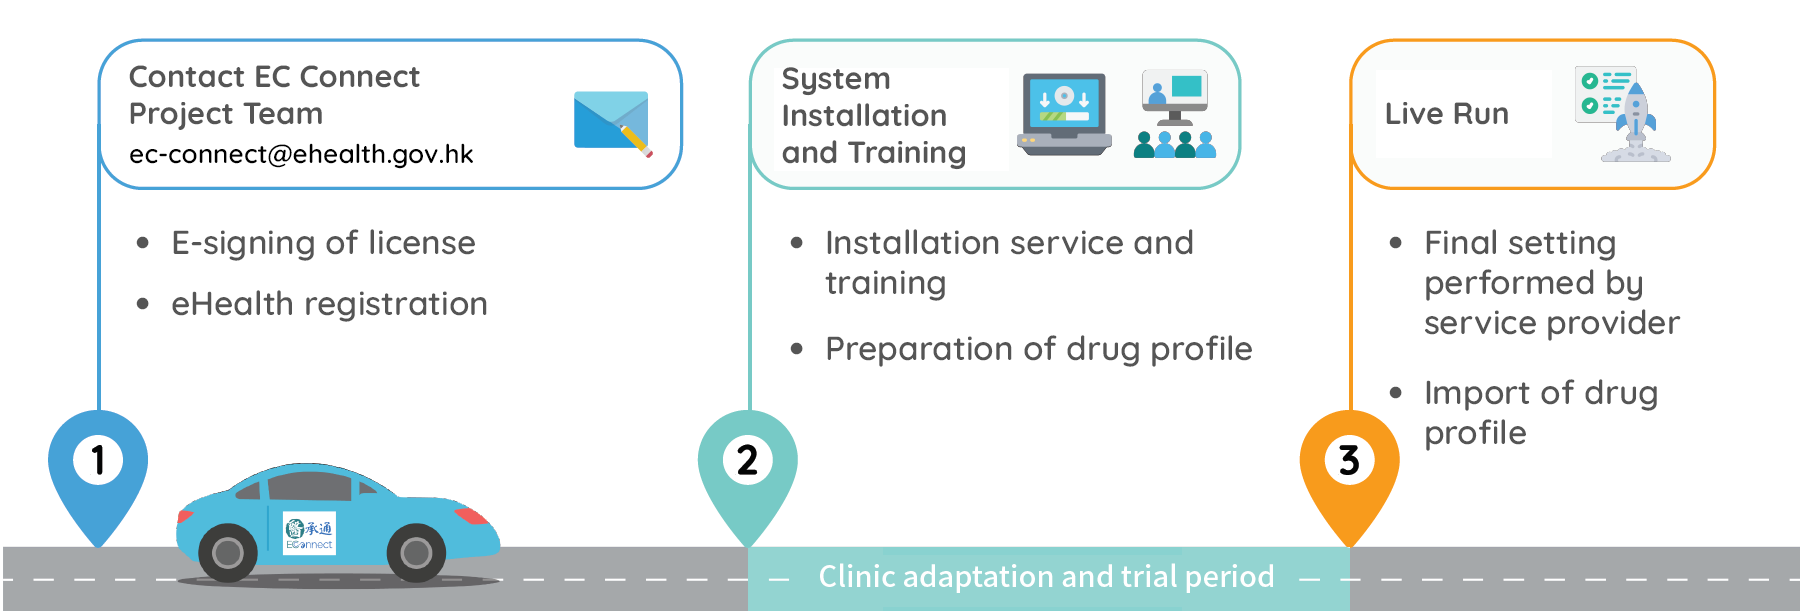 1.Contact EC Connect Project Team ec-connect@ehealth.gov.hk 
                    -E-signing of license
                    -eHealth registration 
                    2.System Installation and Training 
                    -Installation service and training
                    -Preparation of drug profile 
                    (Clinic adaptation and trial period)
                    3.Live Run 
                    -Final setting performed by service provider 
                    -Import of drug profile